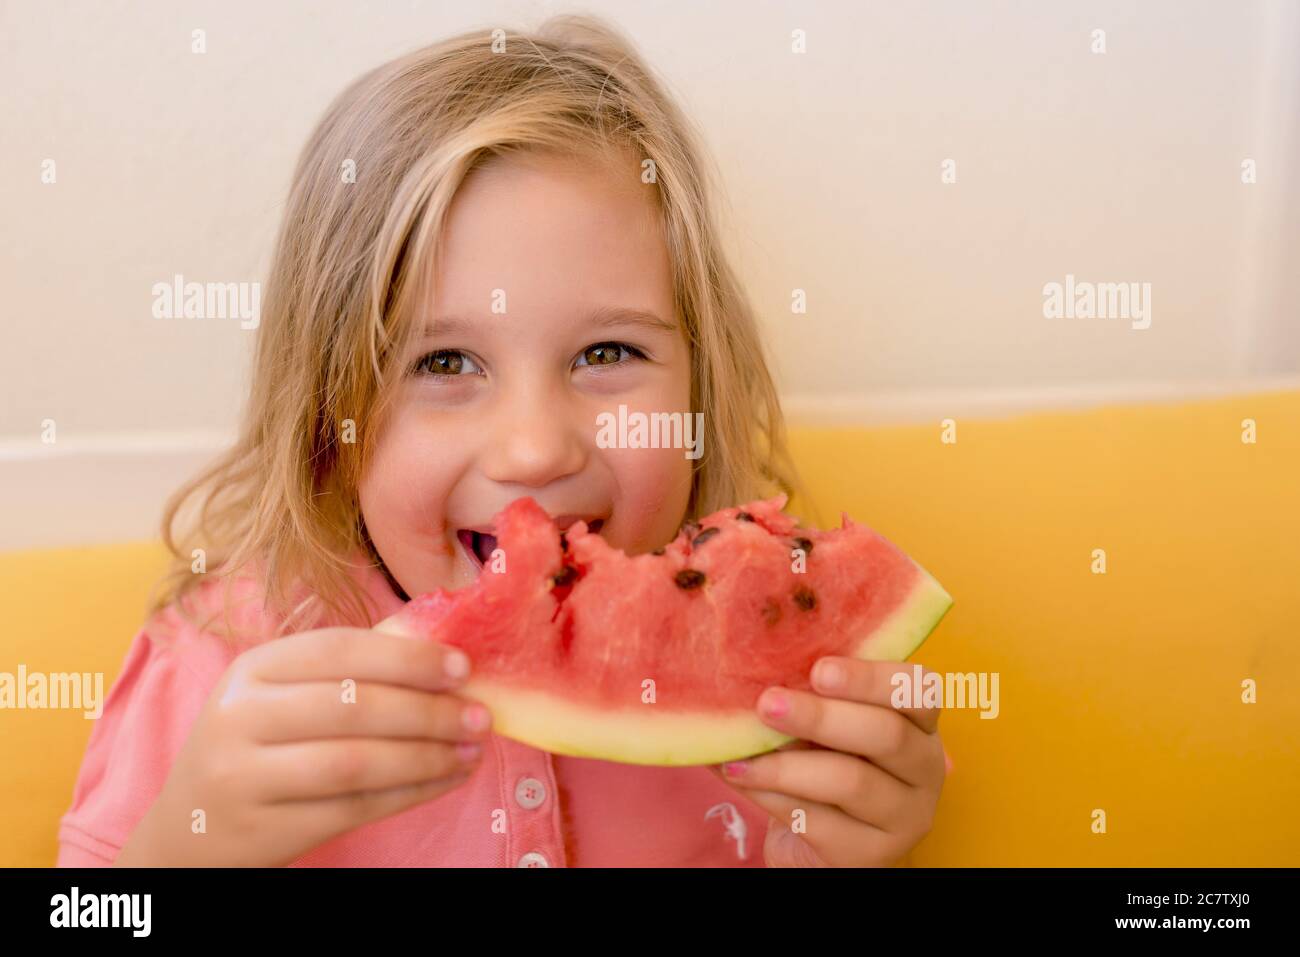 Caucasian girl happily eating a watermelon Stock Photo